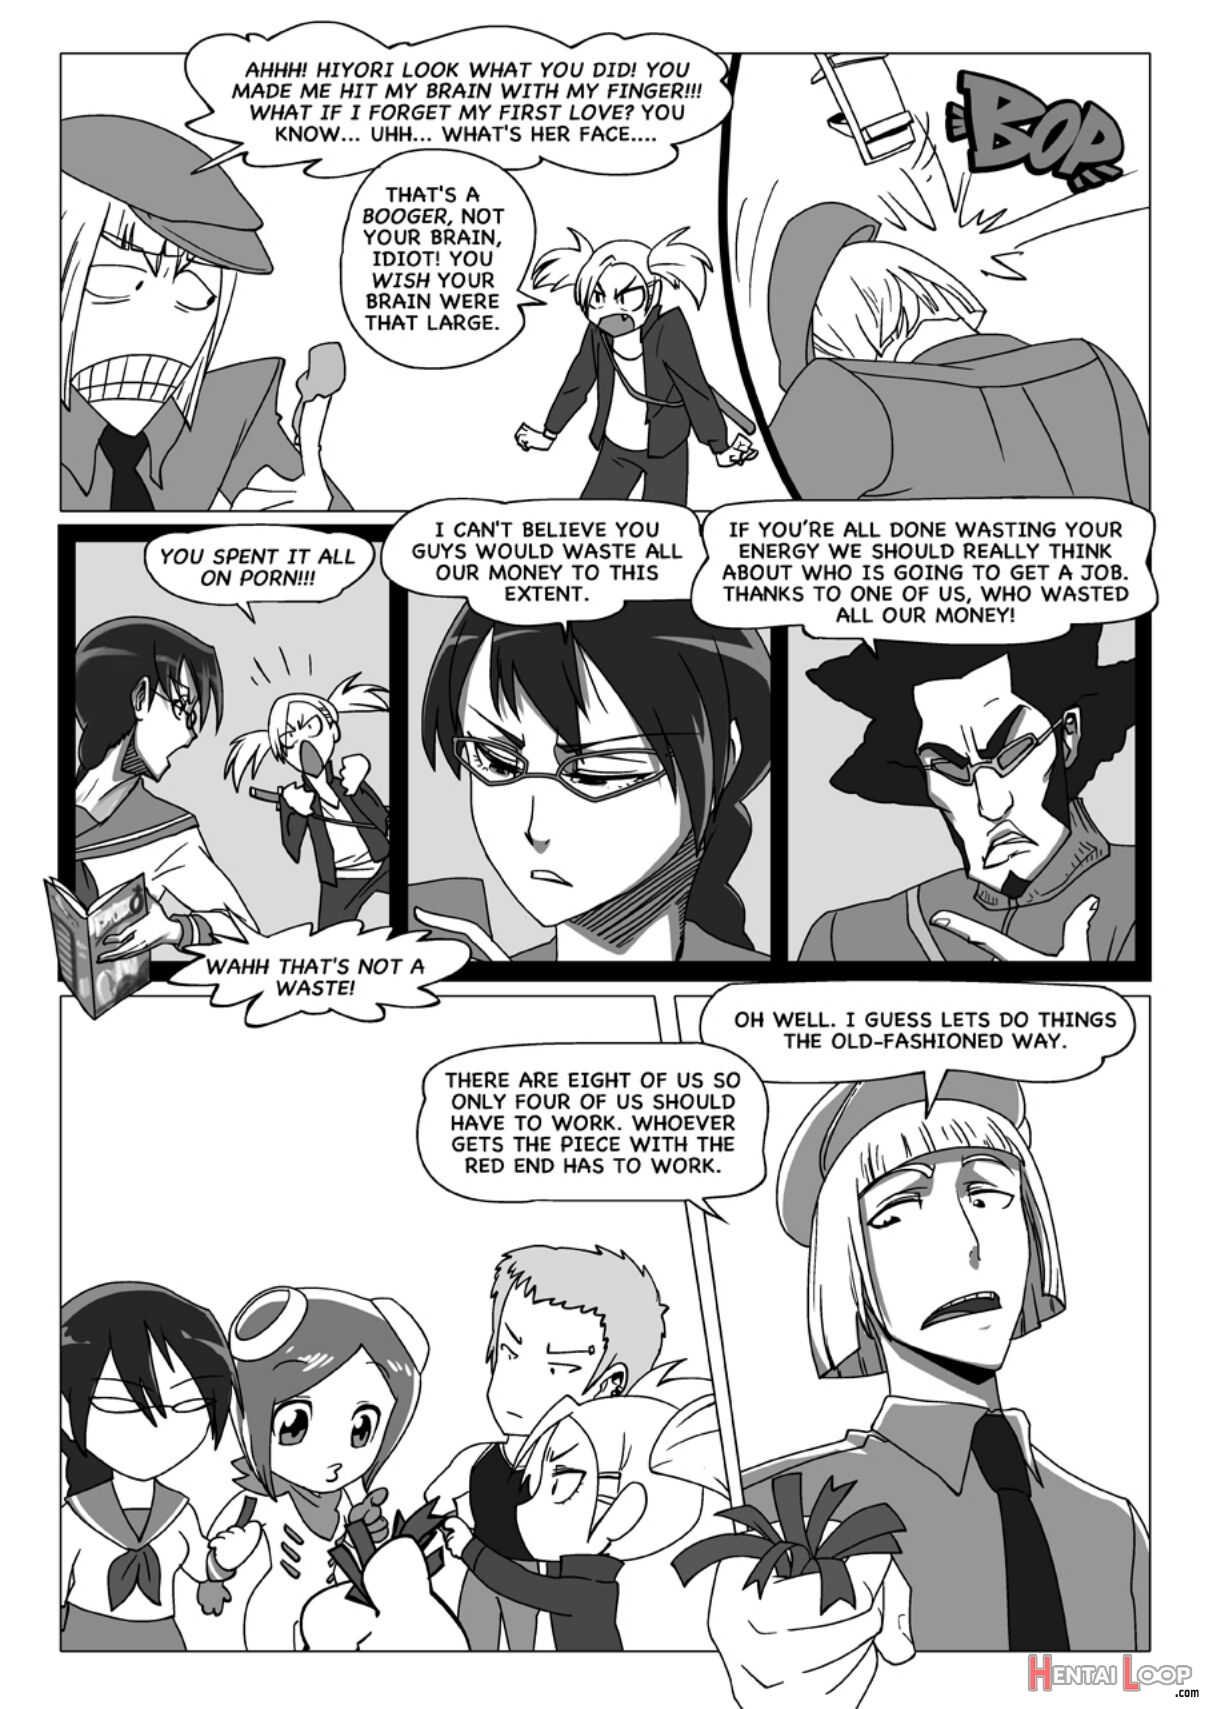 Happy To Serve You - Xxx Version page 56